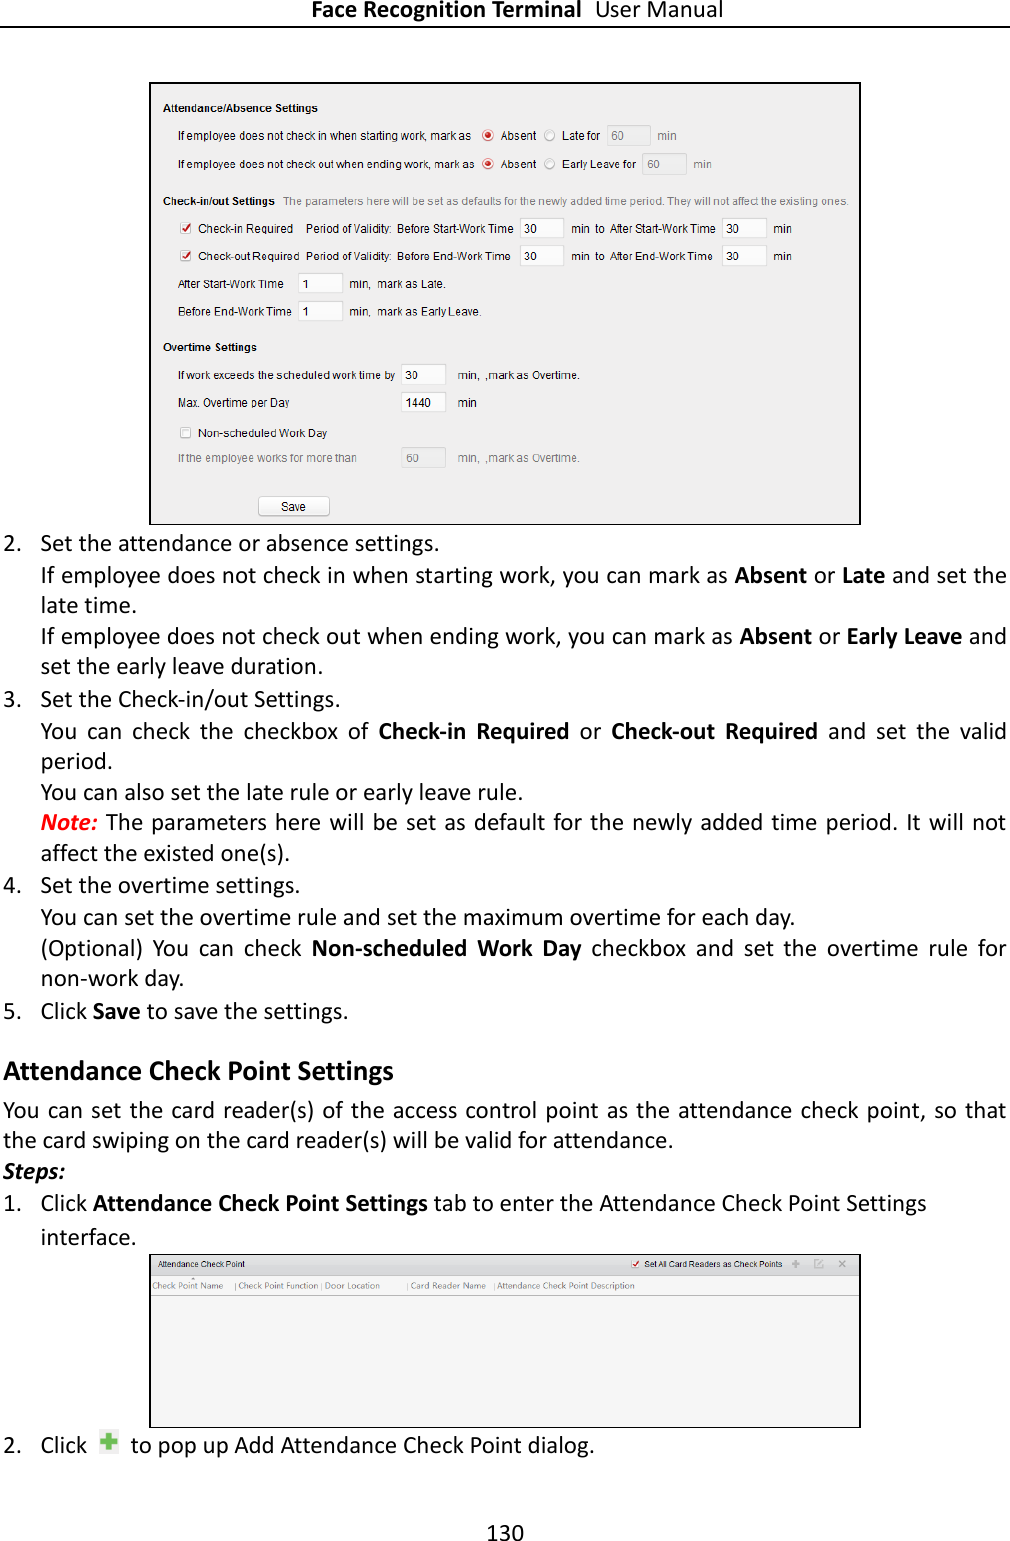 Face Recognition Terminal User Manual 130    2. Set the attendance or absence settings. If employee does not check in when starting work, you can mark as Absent or Late and set the late time. If employee does not check out when ending work, you can mark as Absent or Early Leave and set the early leave duration.  3. Set the Check-in/out Settings. You  can  check  the  checkbox  of  Check-in  Required  or  Check-out  Required  and  set  the  valid period. You can also set the late rule or early leave rule.   Note: The parameters here will be set as default for the newly added time period. It will not affect the existed one(s). 4. Set the overtime settings. You can set the overtime rule and set the maximum overtime for each day. (Optional)  You  can  check  Non-scheduled  Work  Day  checkbox  and  set  the  overtime  rule  for non-work day. 5. Click Save to save the settings. Attendance Check Point Settings You can set the card reader(s) of the access control point as the attendance check point, so that the card swiping on the card reader(s) will be valid for attendance. Steps: 1. Click Attendance Check Point Settings tab to enter the Attendance Check Point Settings interface.  2. Click    to pop up Add Attendance Check Point dialog. 